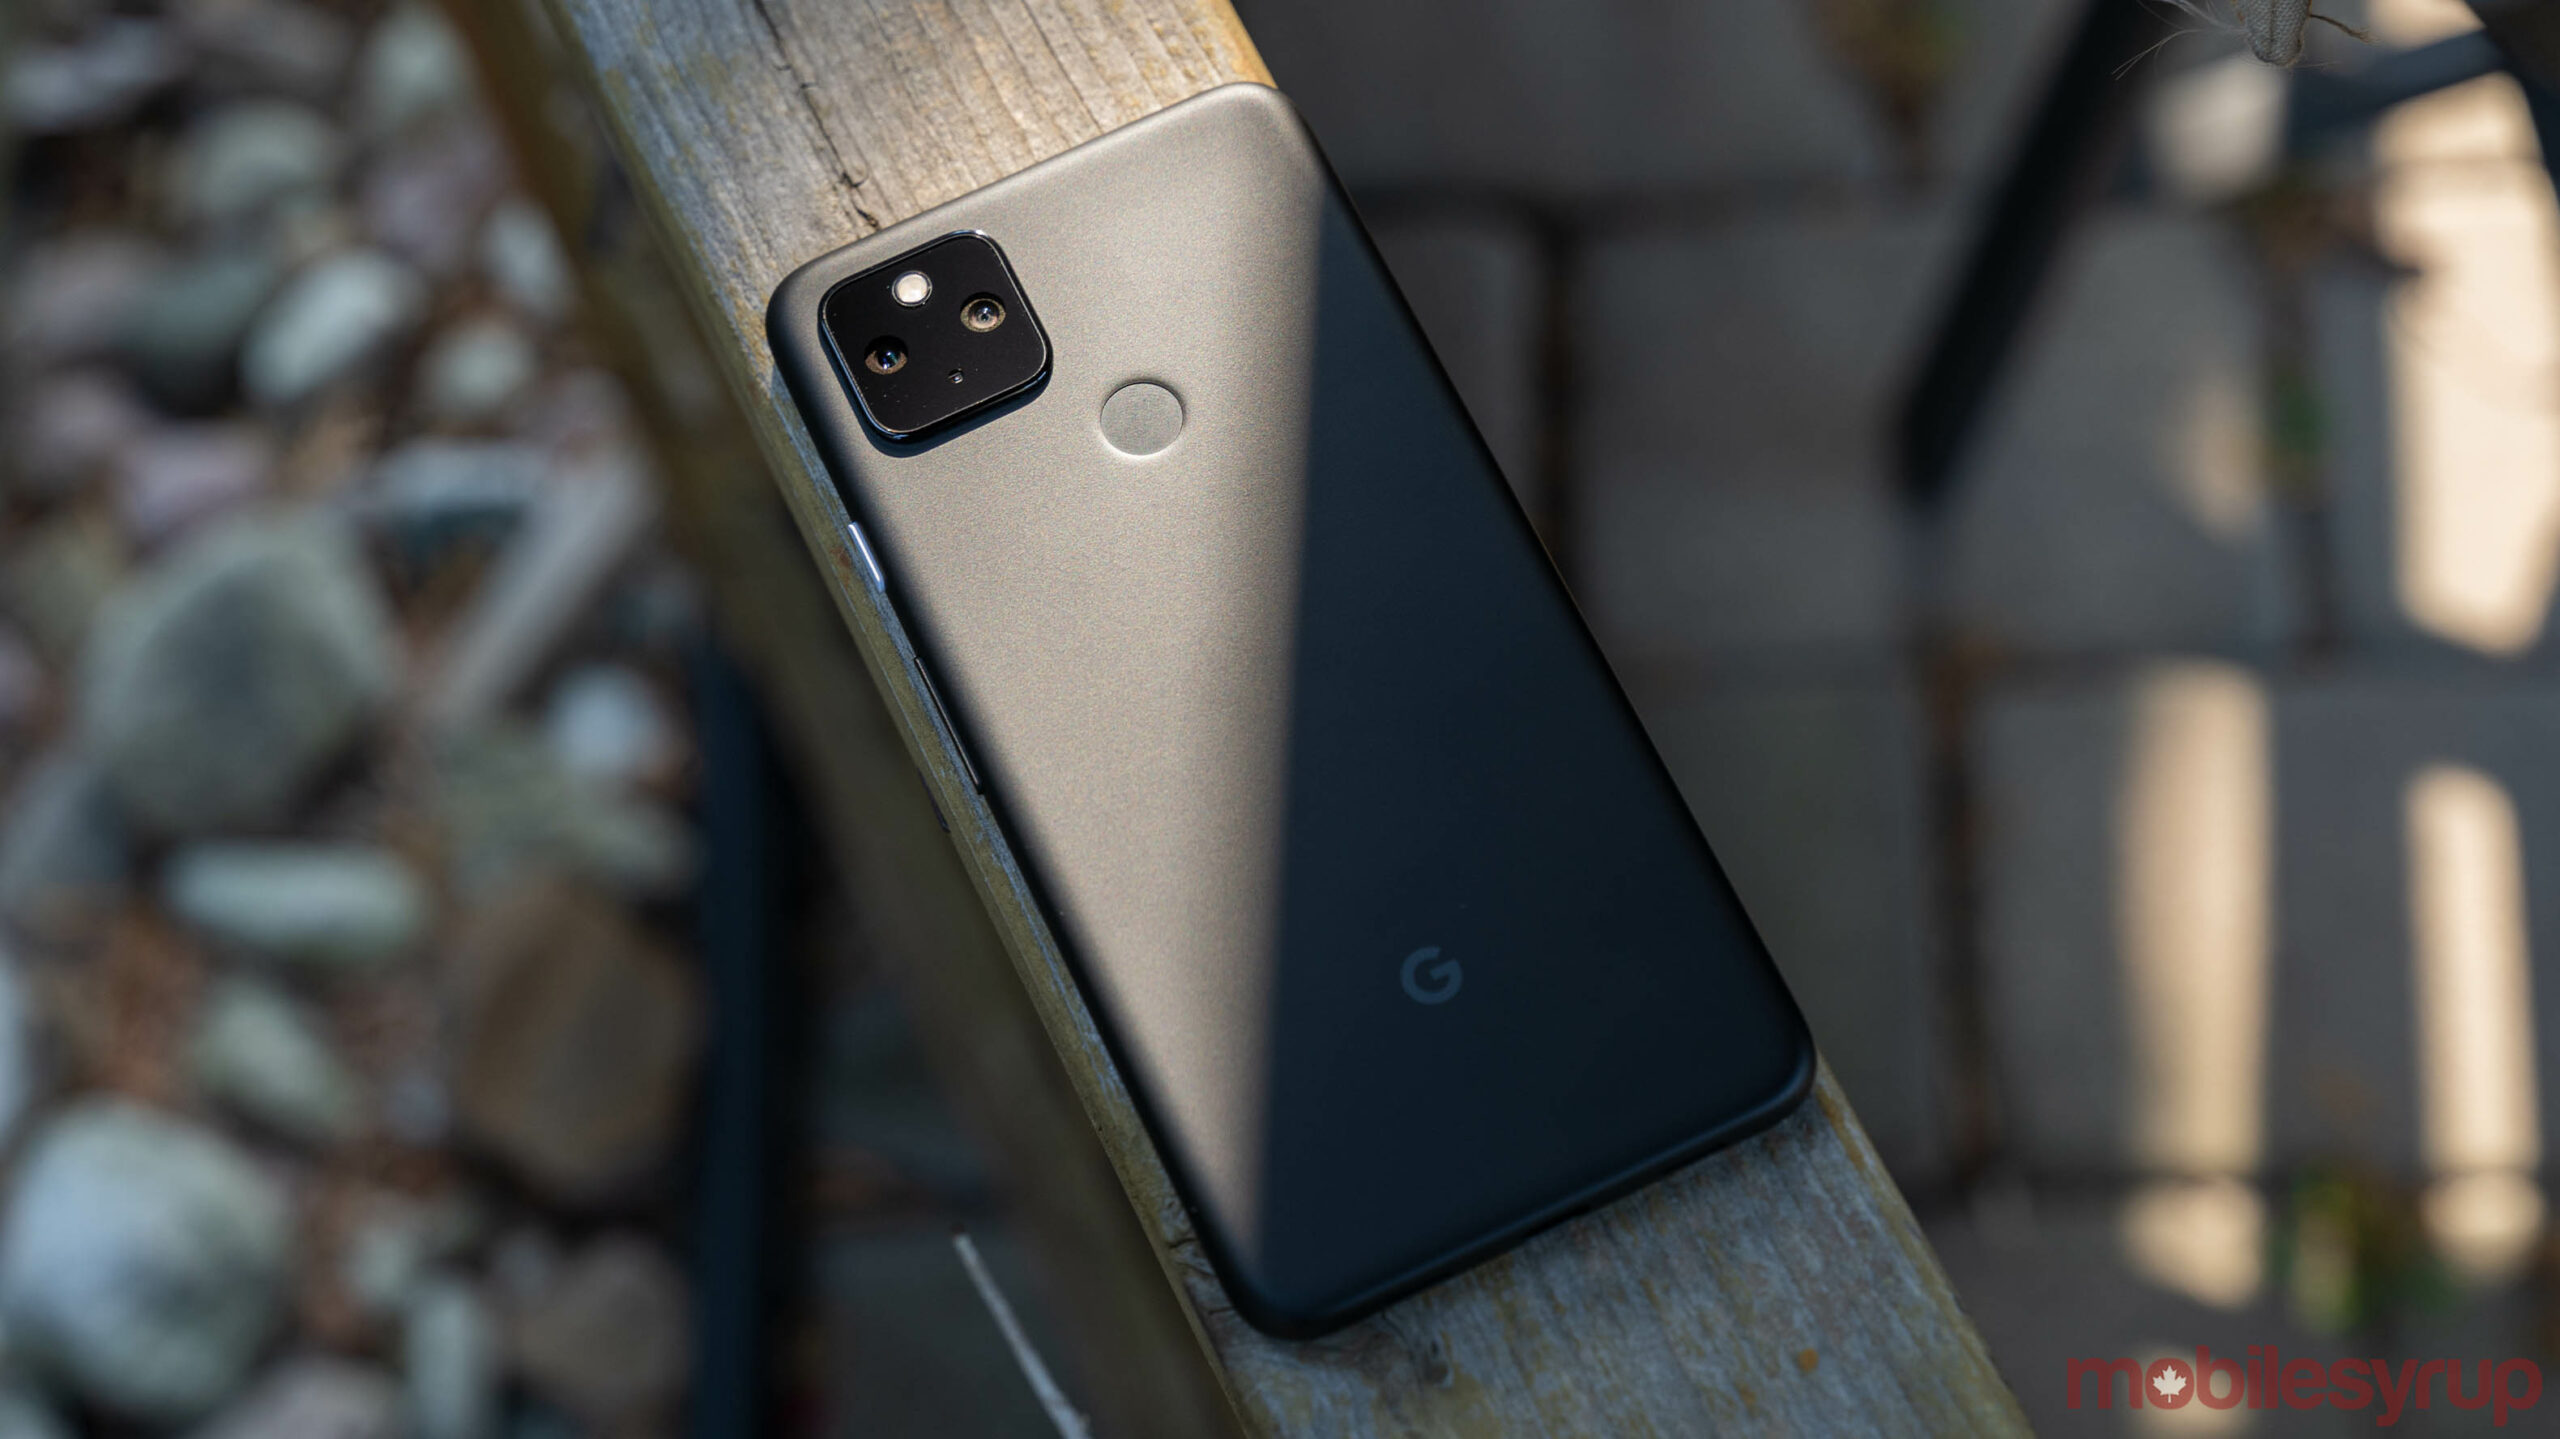 Google Pixel 4a 5G Hands-on: Big Pixel experience on a budget